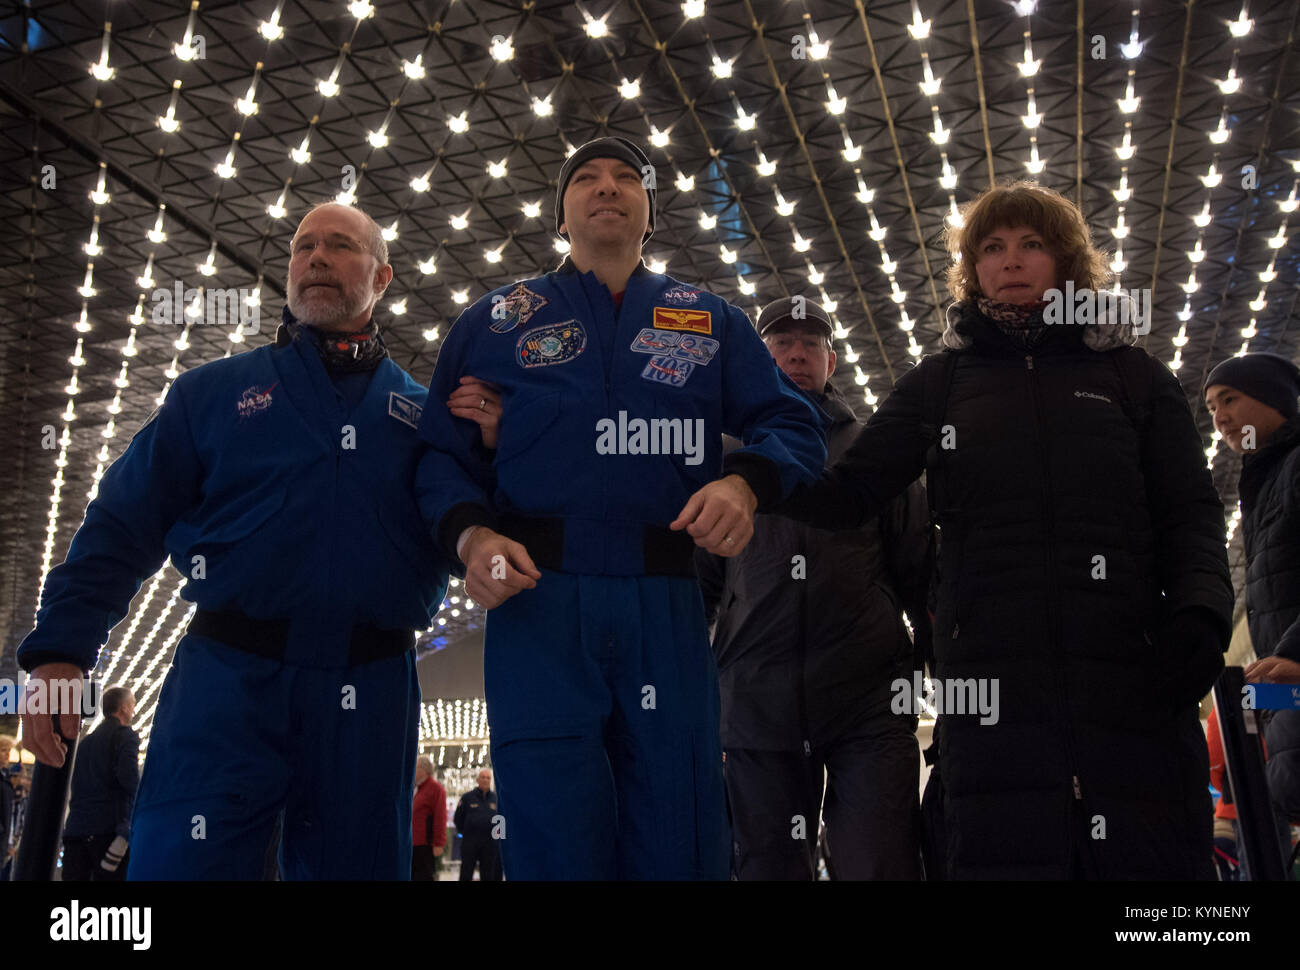 NASA astronaut Randy Bresnik, center, arrives at the Karaganda Airport in Kazakhstan airport after he, Roscosmos cosmonaut Sergey Ryazanskiy and, ESA (European Space Agency) astronaut Paolo Nespoli landed in their Soyuz MS-05 spacecraft in a remote area near the town of Zhezkazgan, Kazakhstan on Thursday, Dec. 14, 2017. Bresnik, Nespoli and Ryazanskiy are returning after 139 days in space where they served as members of the Expedition 52 and 53 crews onboard the International Space Station. Photo Credit: (NASA/Bill Ingalls) Stock Photo